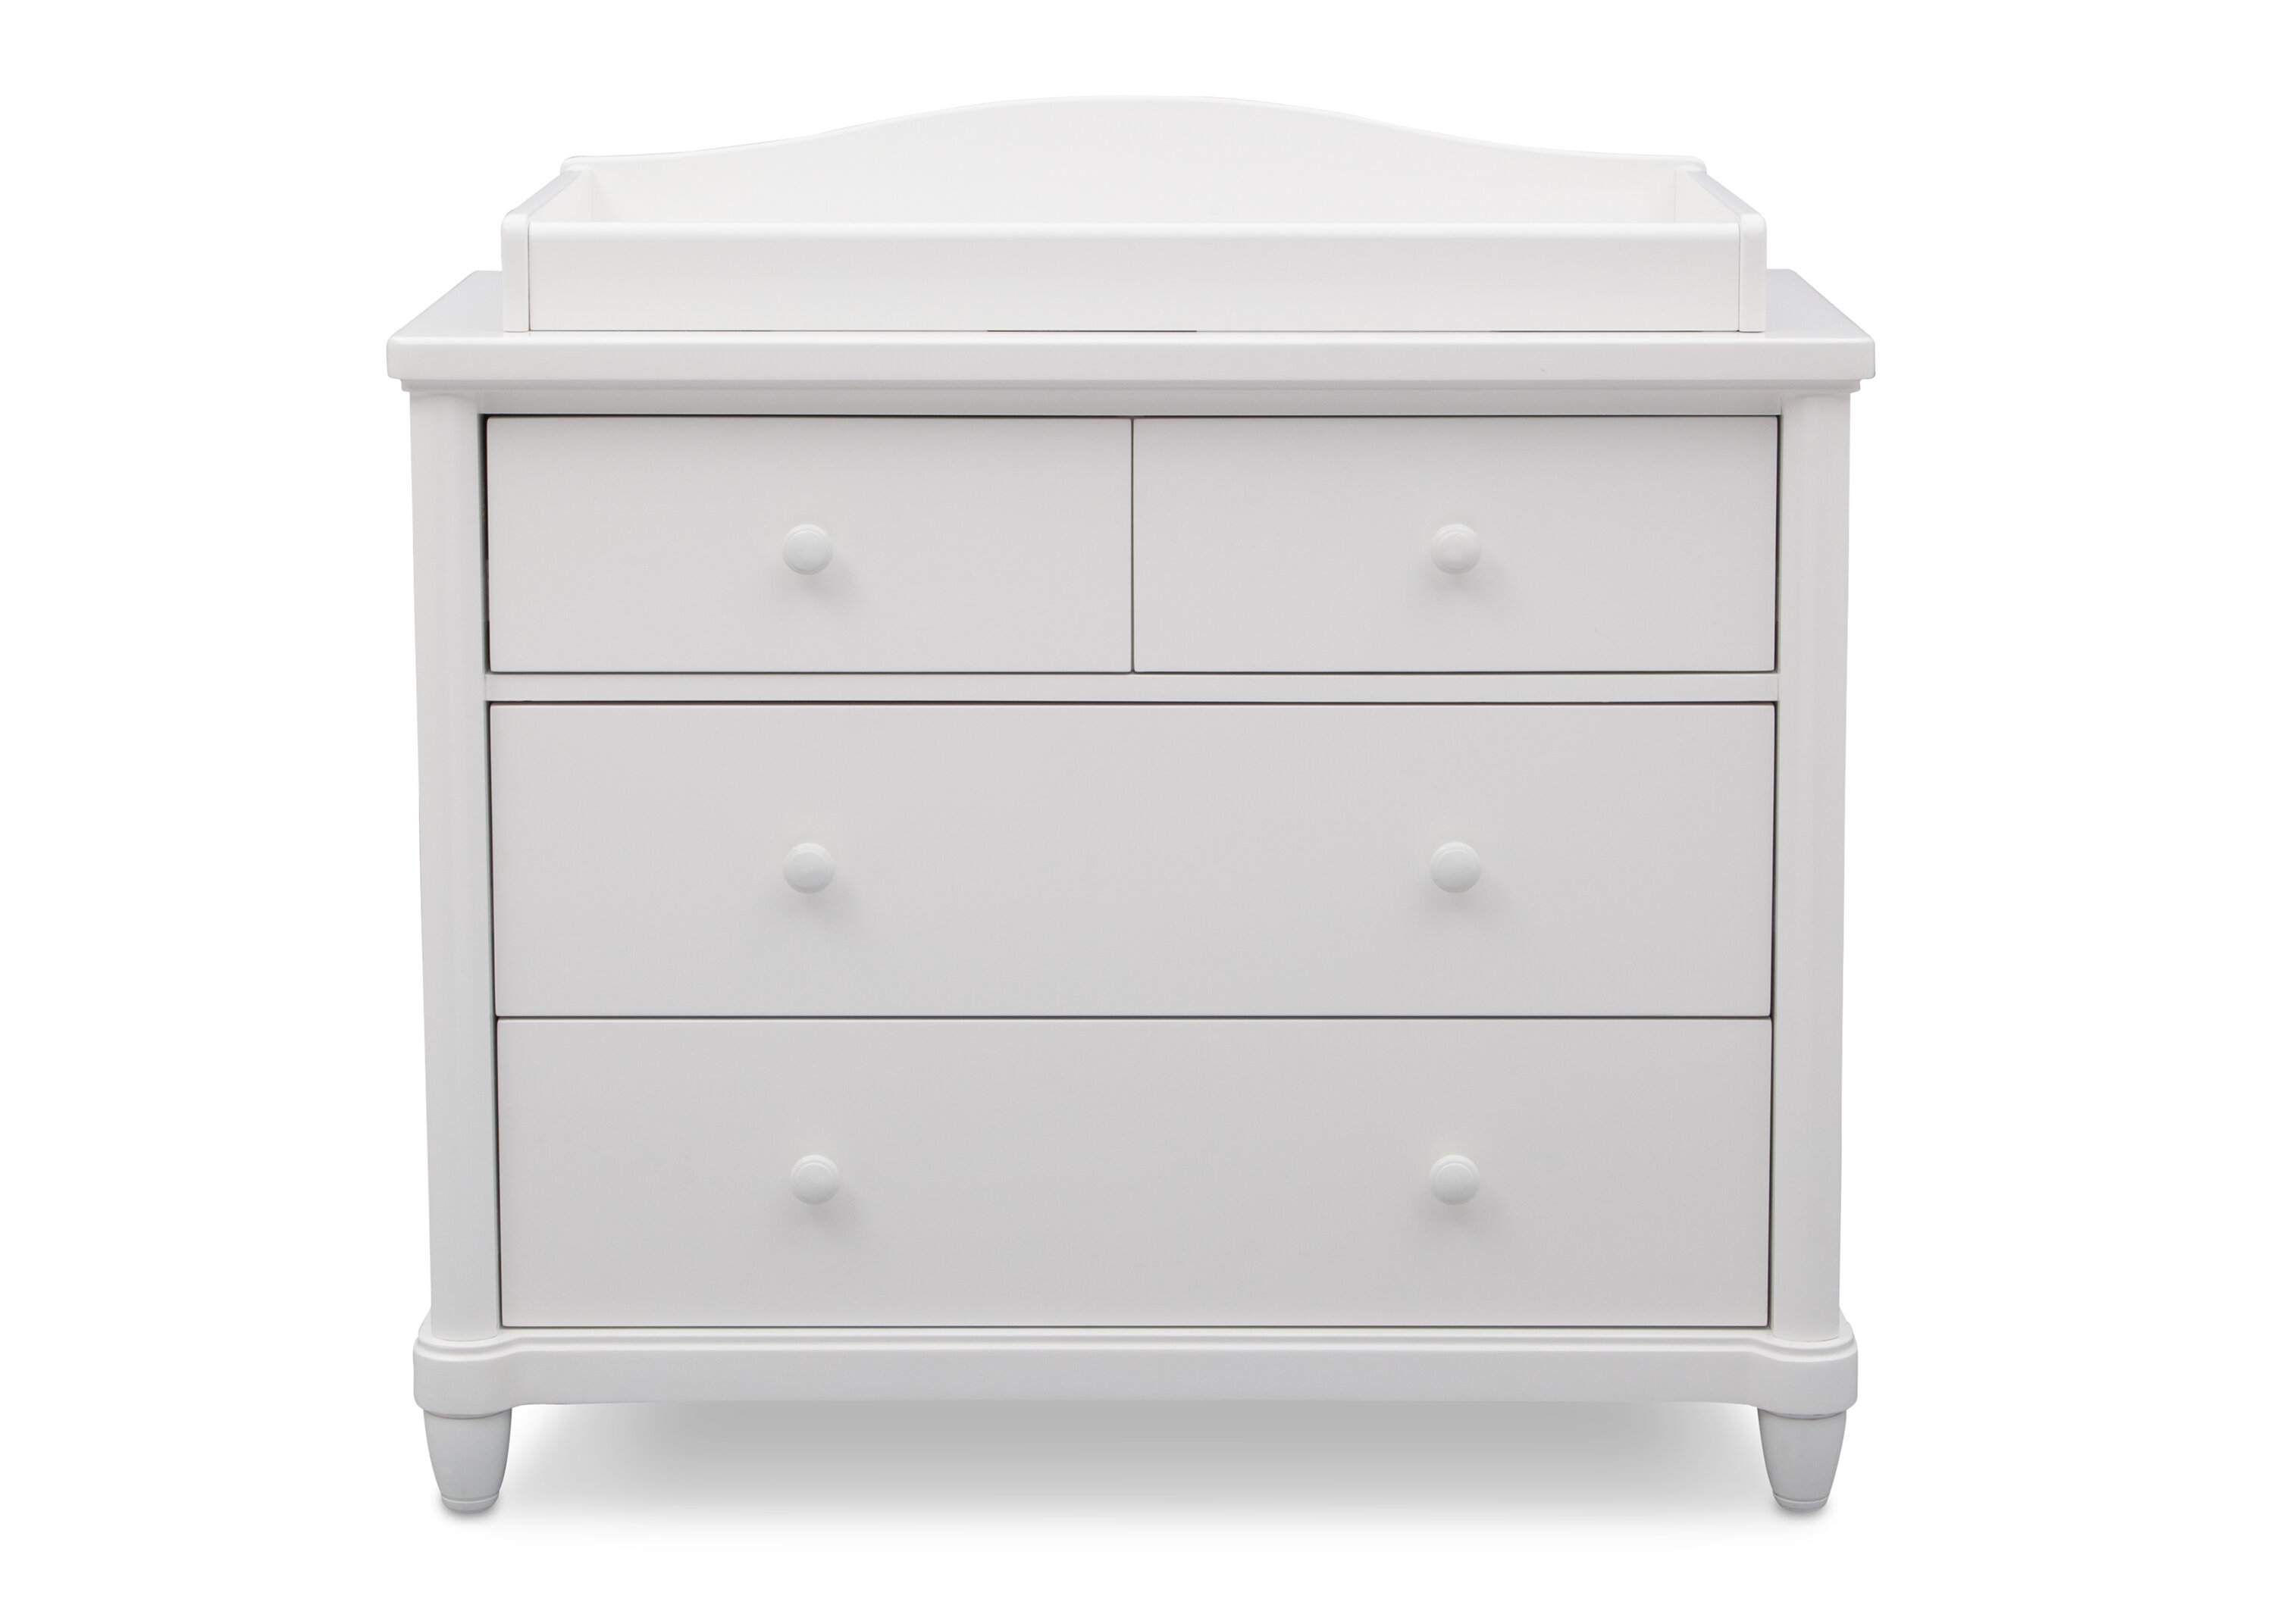 dressers that can be used as changing tables